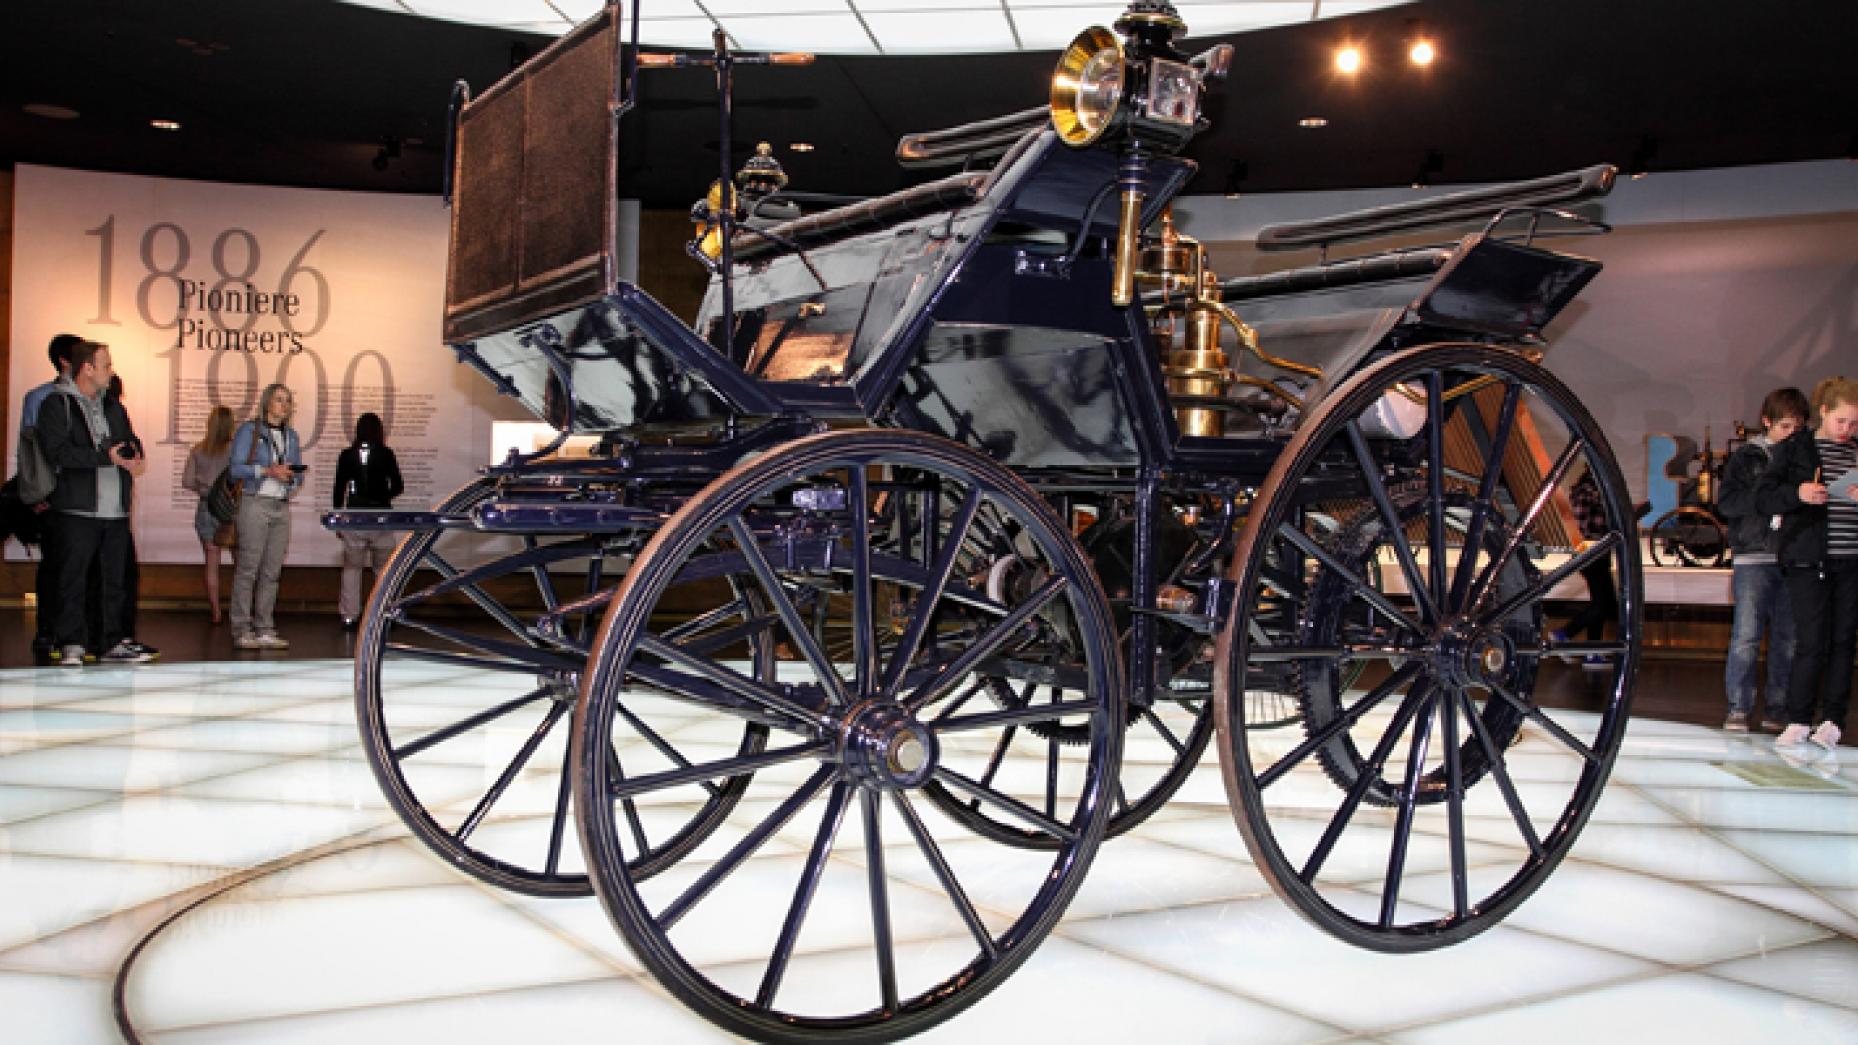 DAIMLER MOTORISED CARRIAGE: The world’s first four-wheeled vehicle, installed with DMG’s ‘grandfather clock’ 1bhp engine. That engine eventually found its way into boats and aircraft too, hence the three-pointed star of the brand: to conquer the three points of land, sea and air. Top speed was a heady 18km/h.